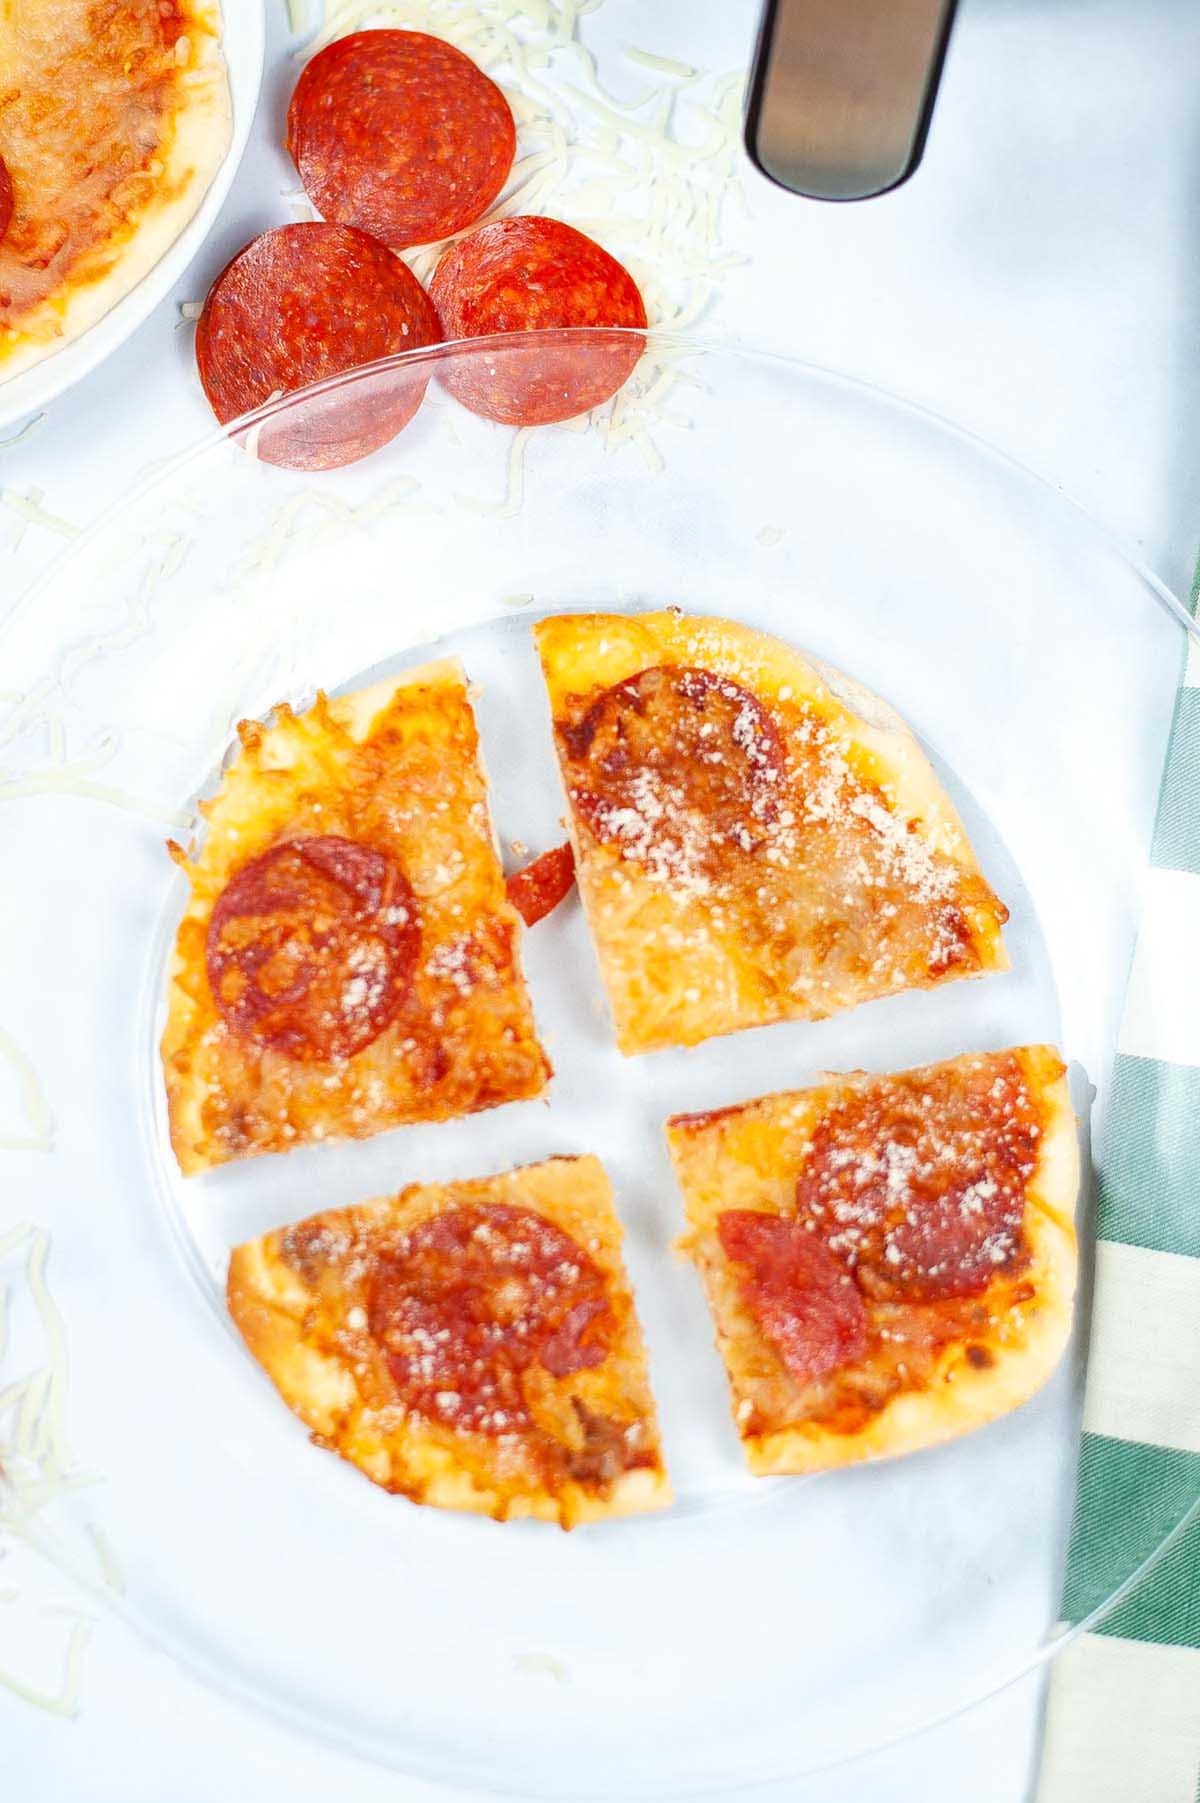 Pepperoni pizza on a clear plate.